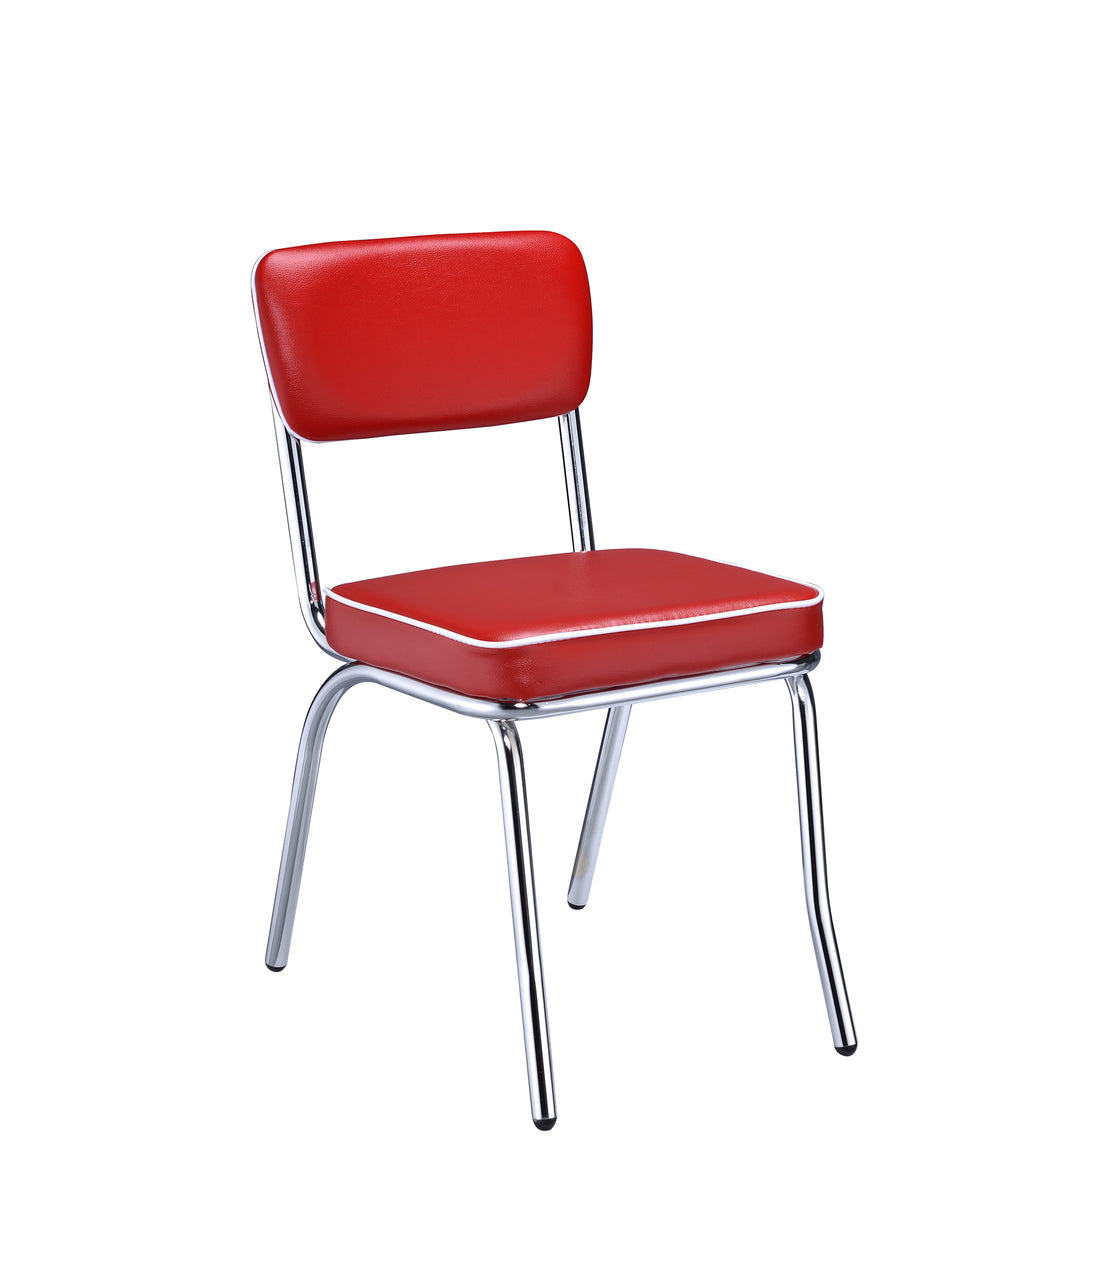 Leather Upholstered Metallic Retro Dining Side Chair, Red, Set of 2 - BM182770